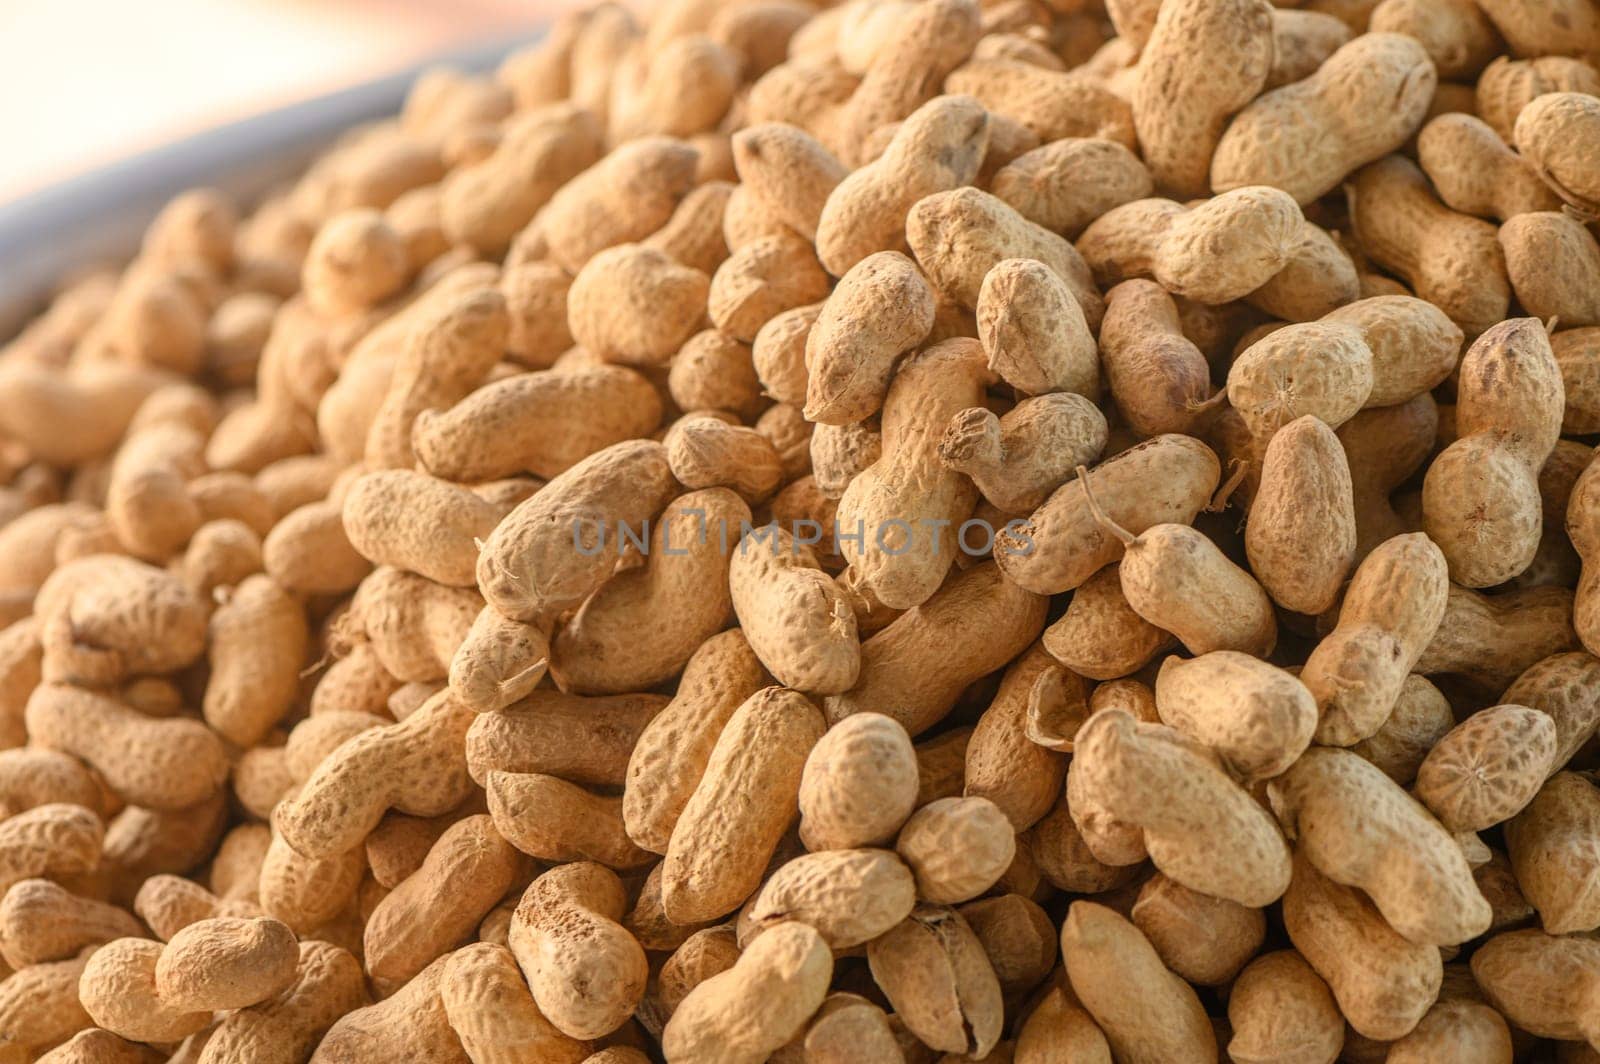 peanuts in pods piled in a pile at the local market 1 by Mixa74